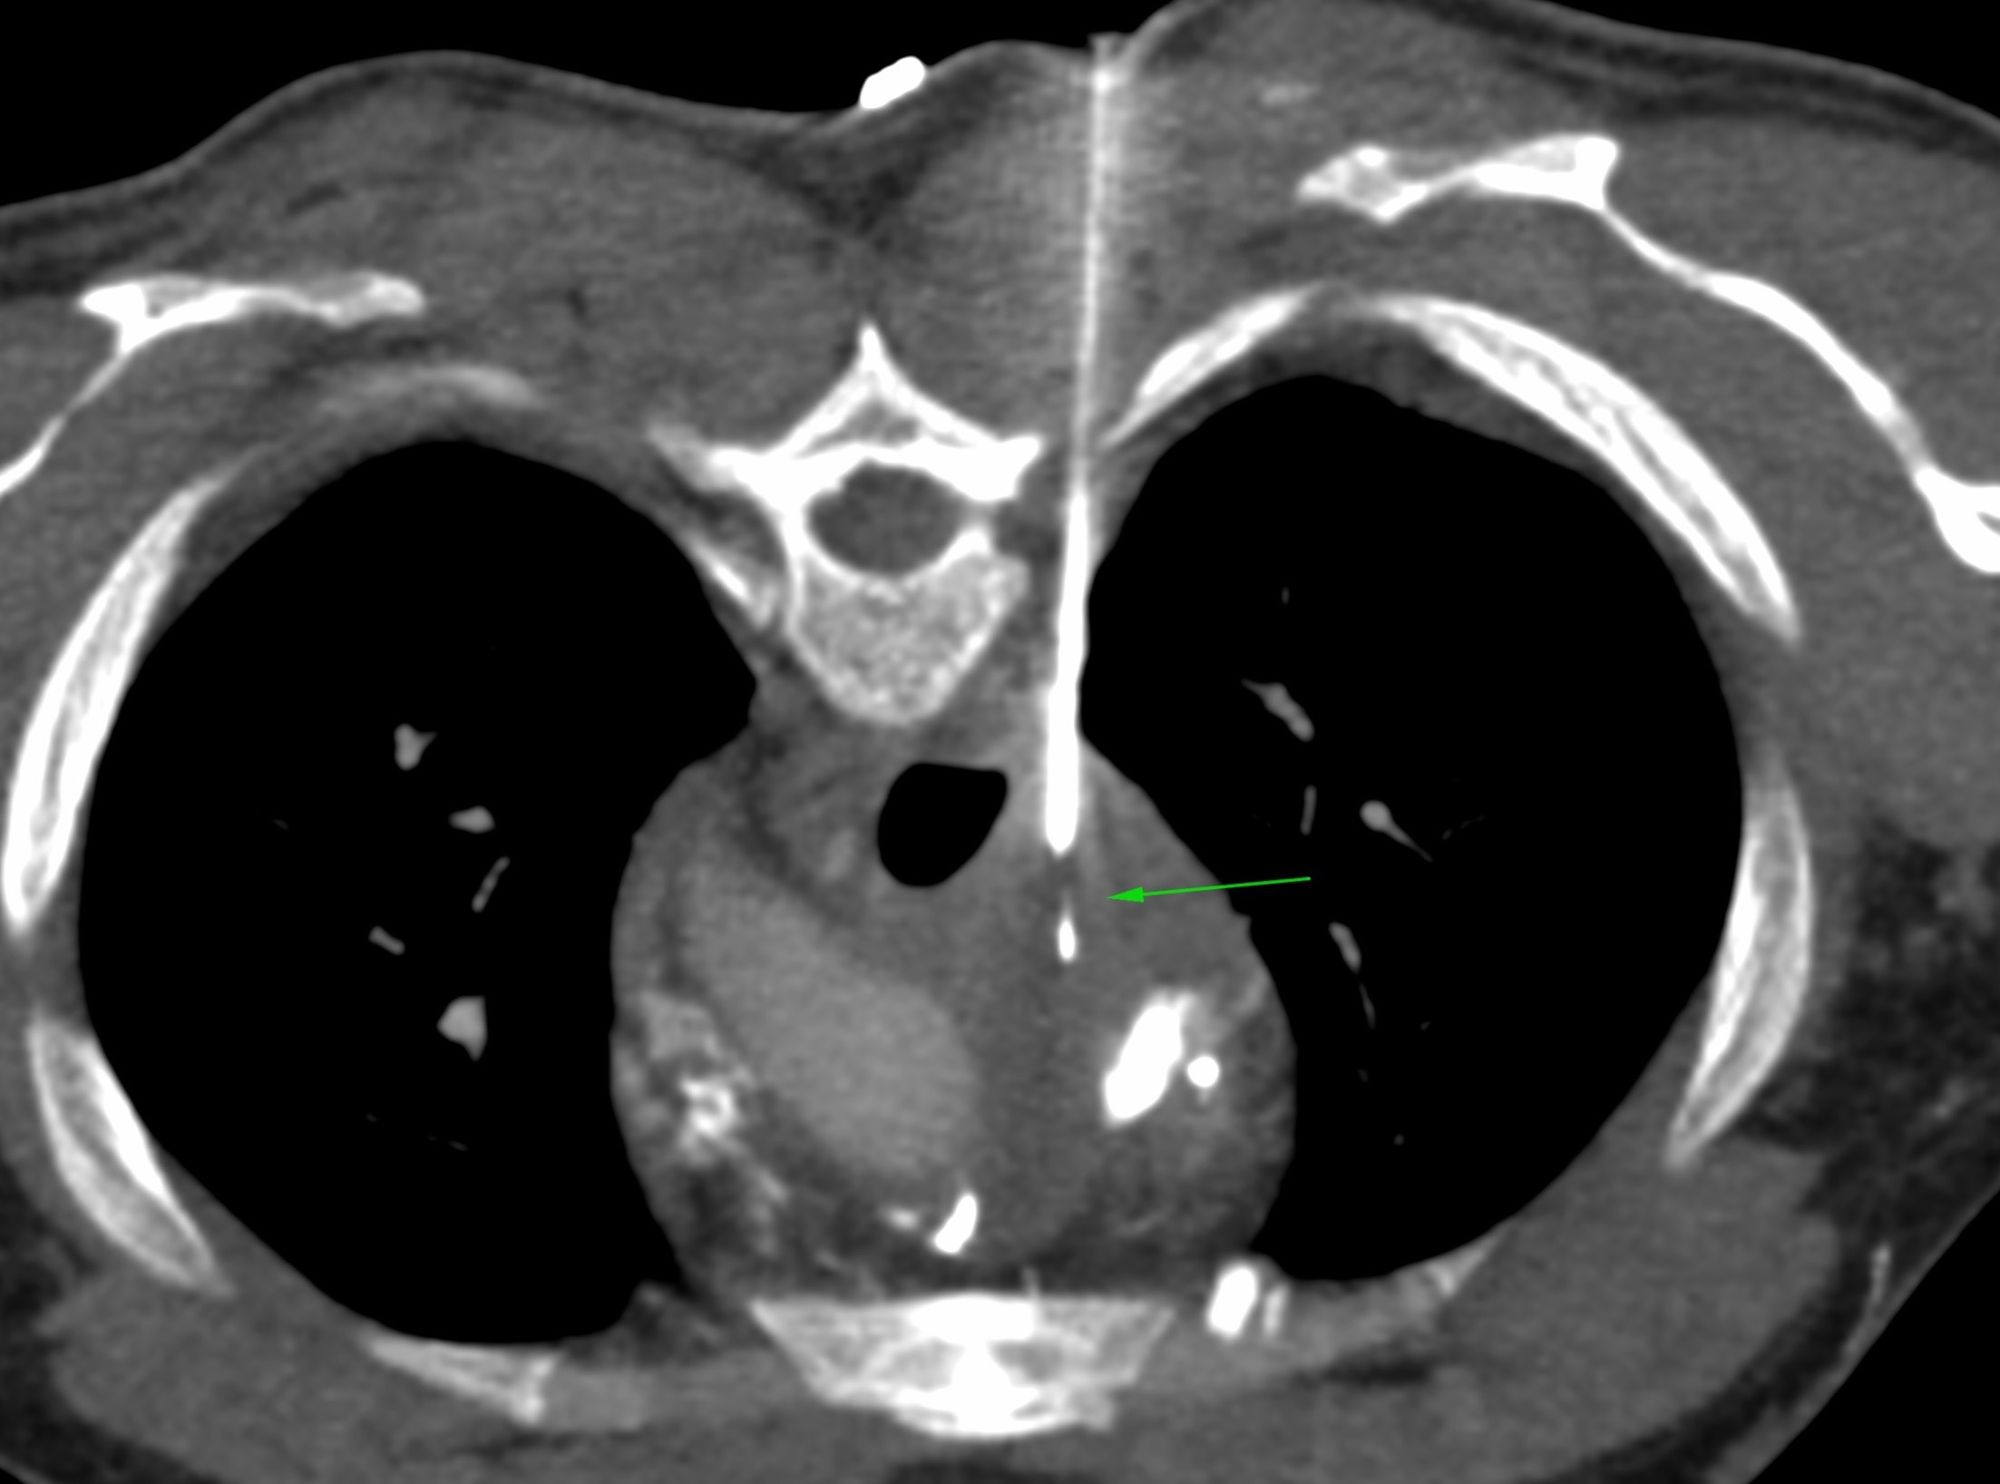 Case 50: When the "Feel" of the Lesion Gives The Diagnosis - Right Paratracheal Mediastinal Mass Biopsy with an Extrapleural Approach - Mediastinal Fibrosis